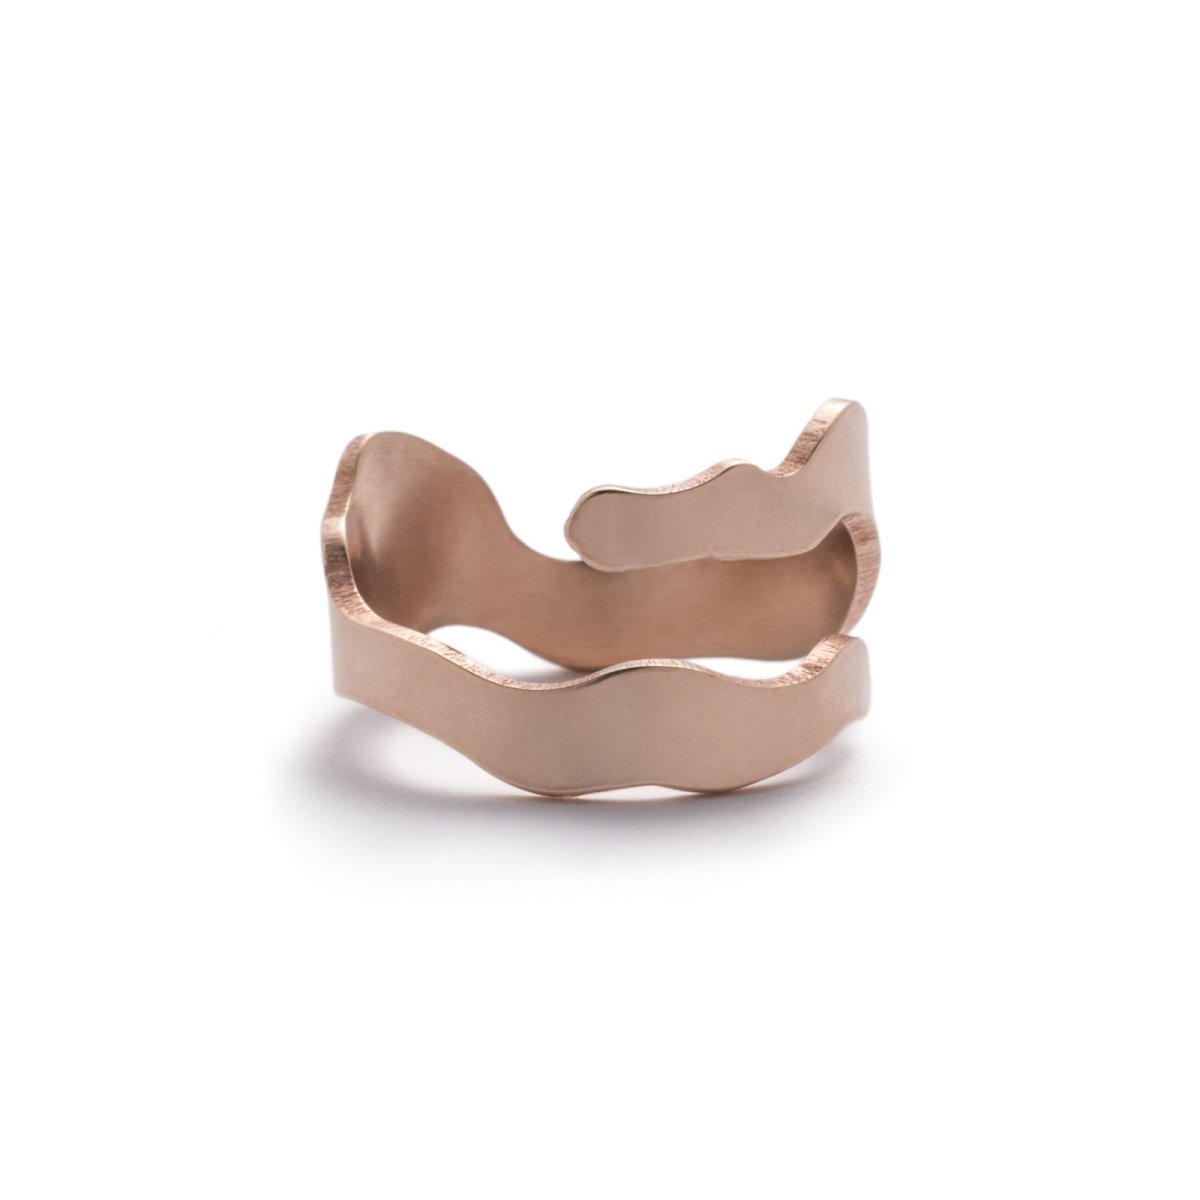 Sleek and simple brushed bronze adjustable ring, featuring a wavy shape inspired by Portland's Willamette River. Hand-crafted in Portland, Oregon. 